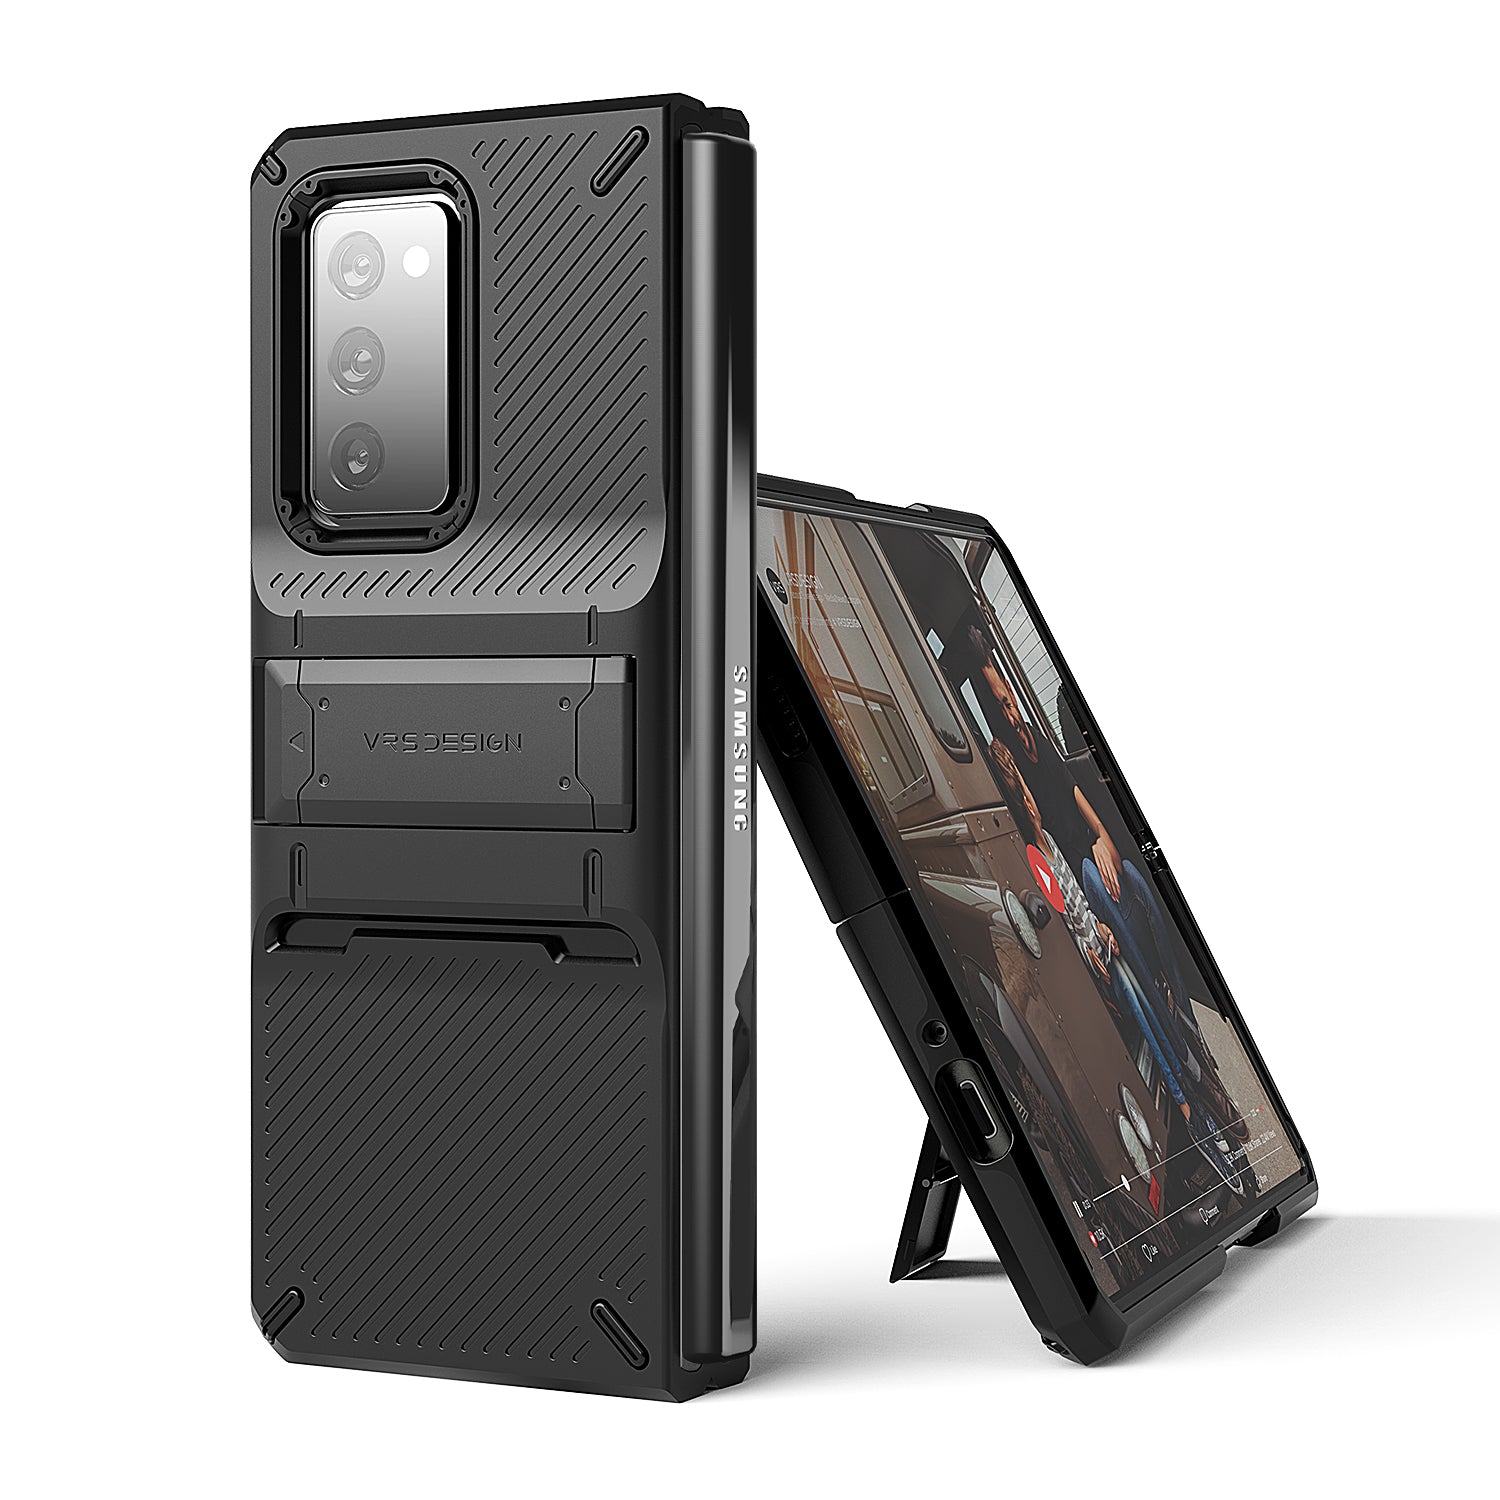 Samsung Galaxy Z Fold 2 wallet rugged case with multiple durable and convenient card slot with sleek minimalism by VRS